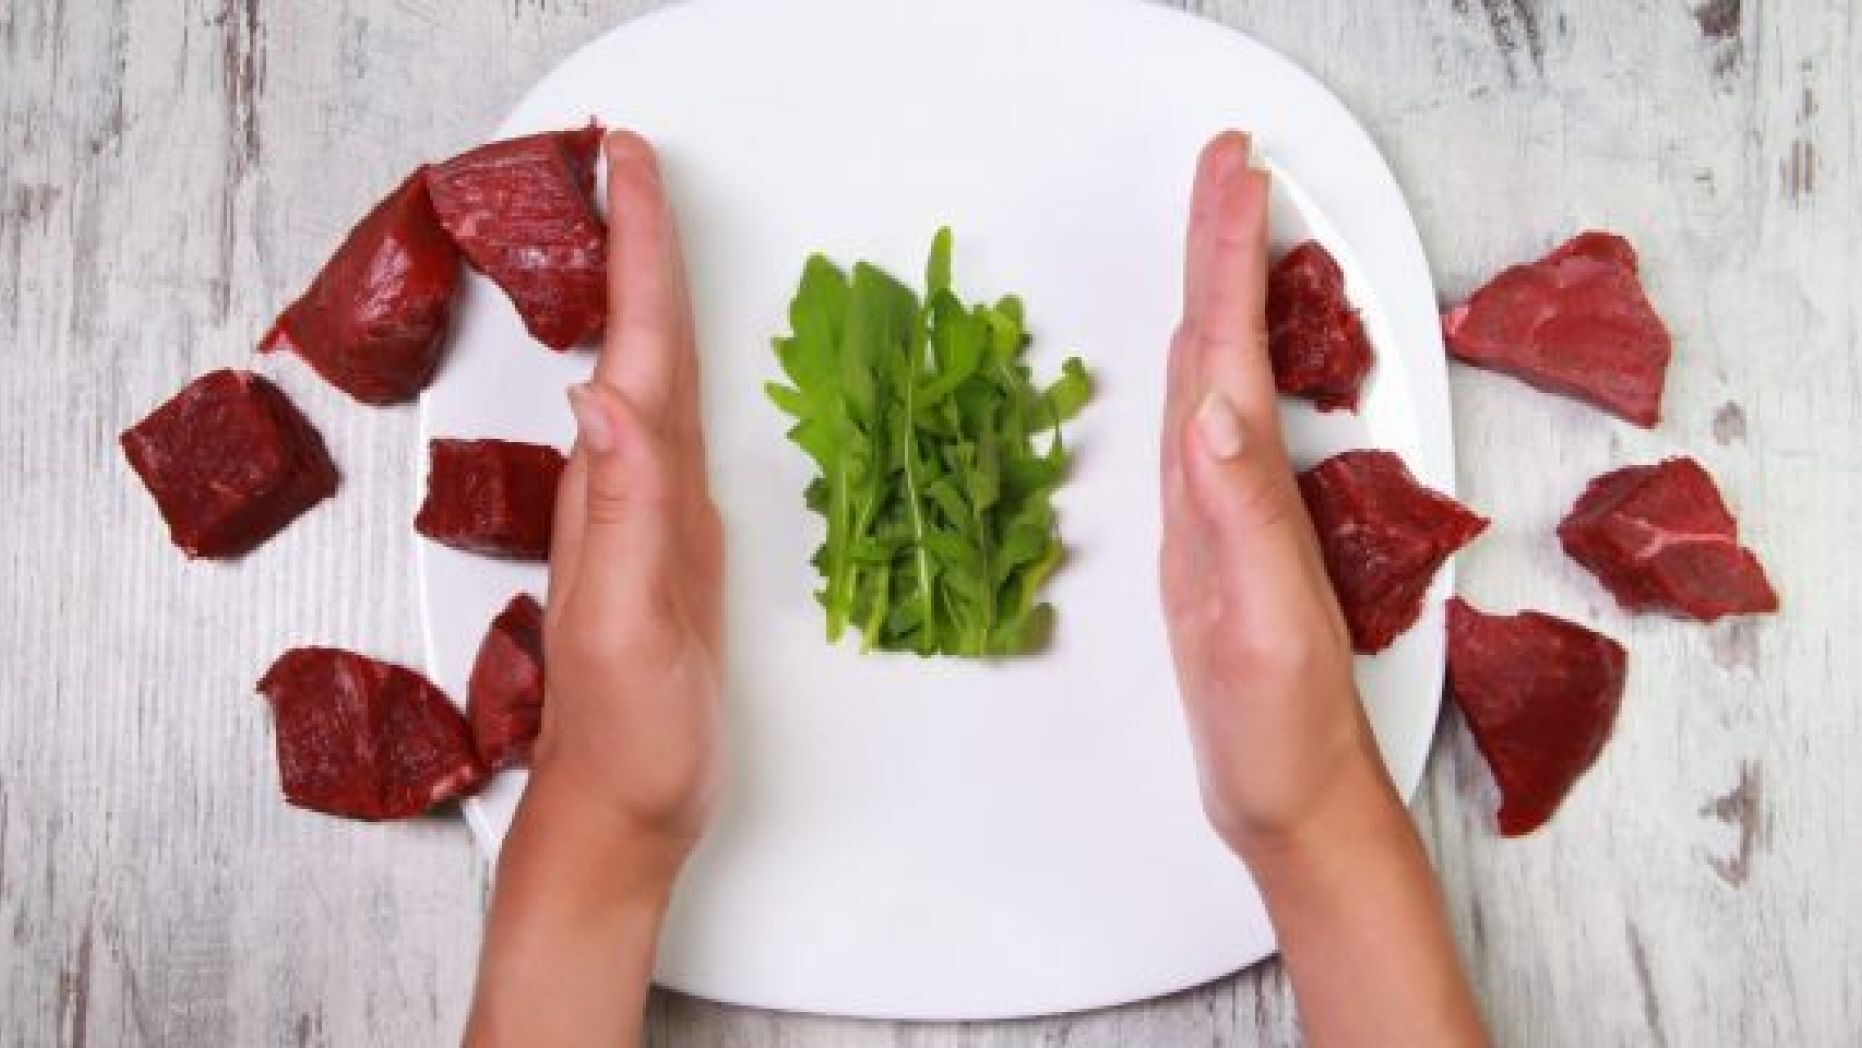 Swapping meat for plant based protein may help lower cardiovascular risks, study says